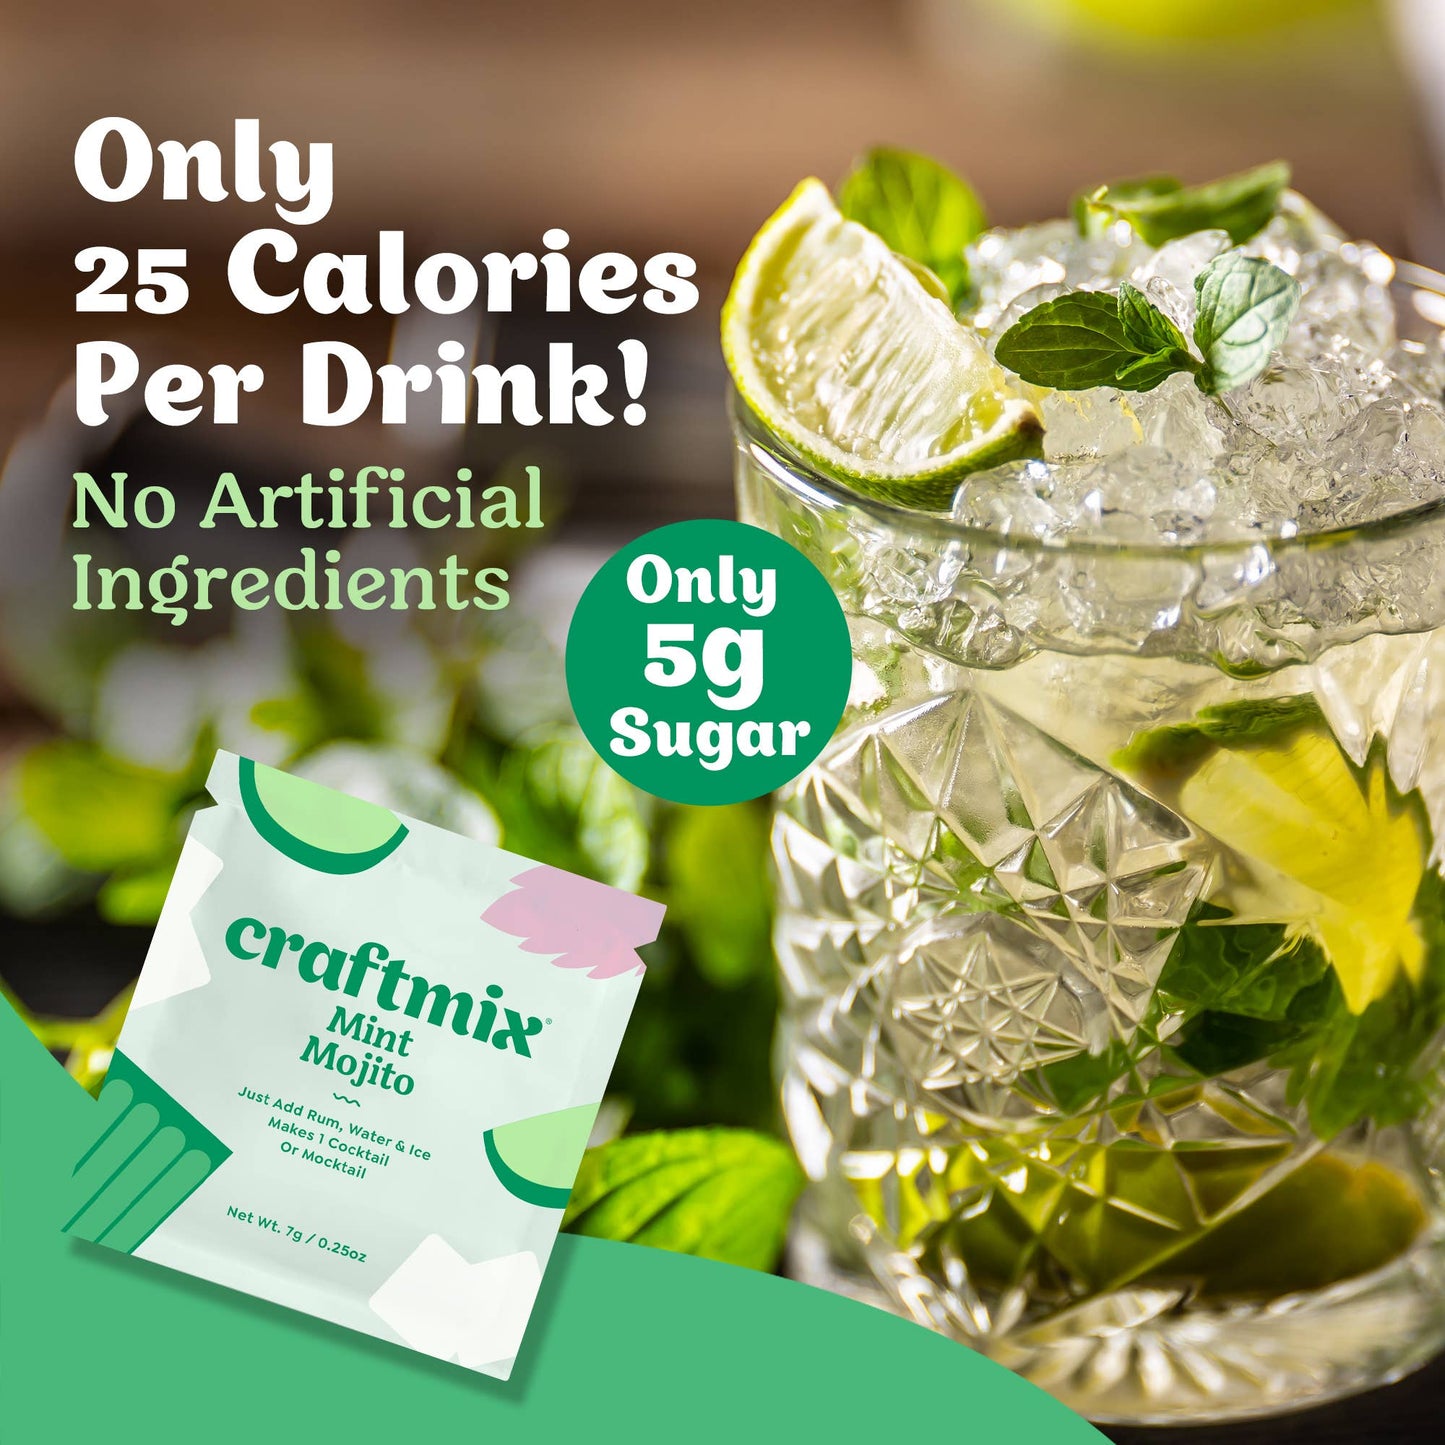 Mint Mojito Cocktail/Mocktail Mixer - 12 Servings Multipack